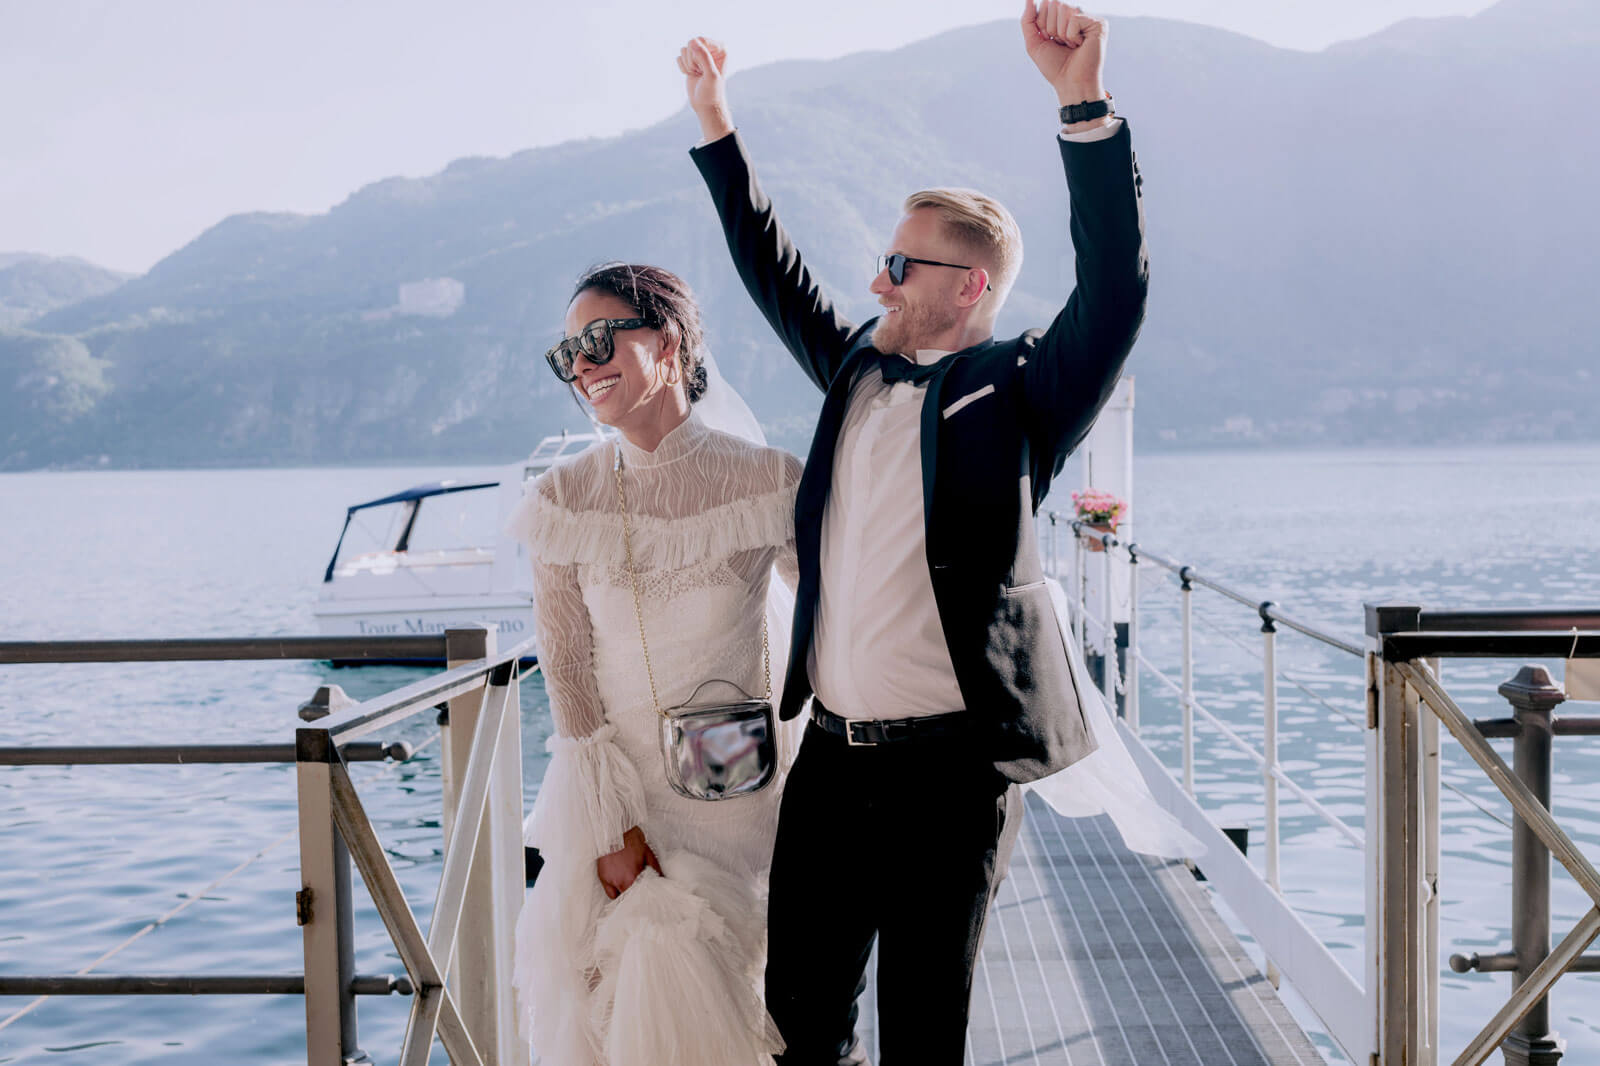 The groom, raising his two arms, is walking with the bride on a dock, with a boat, ocean, and mountain in the background.